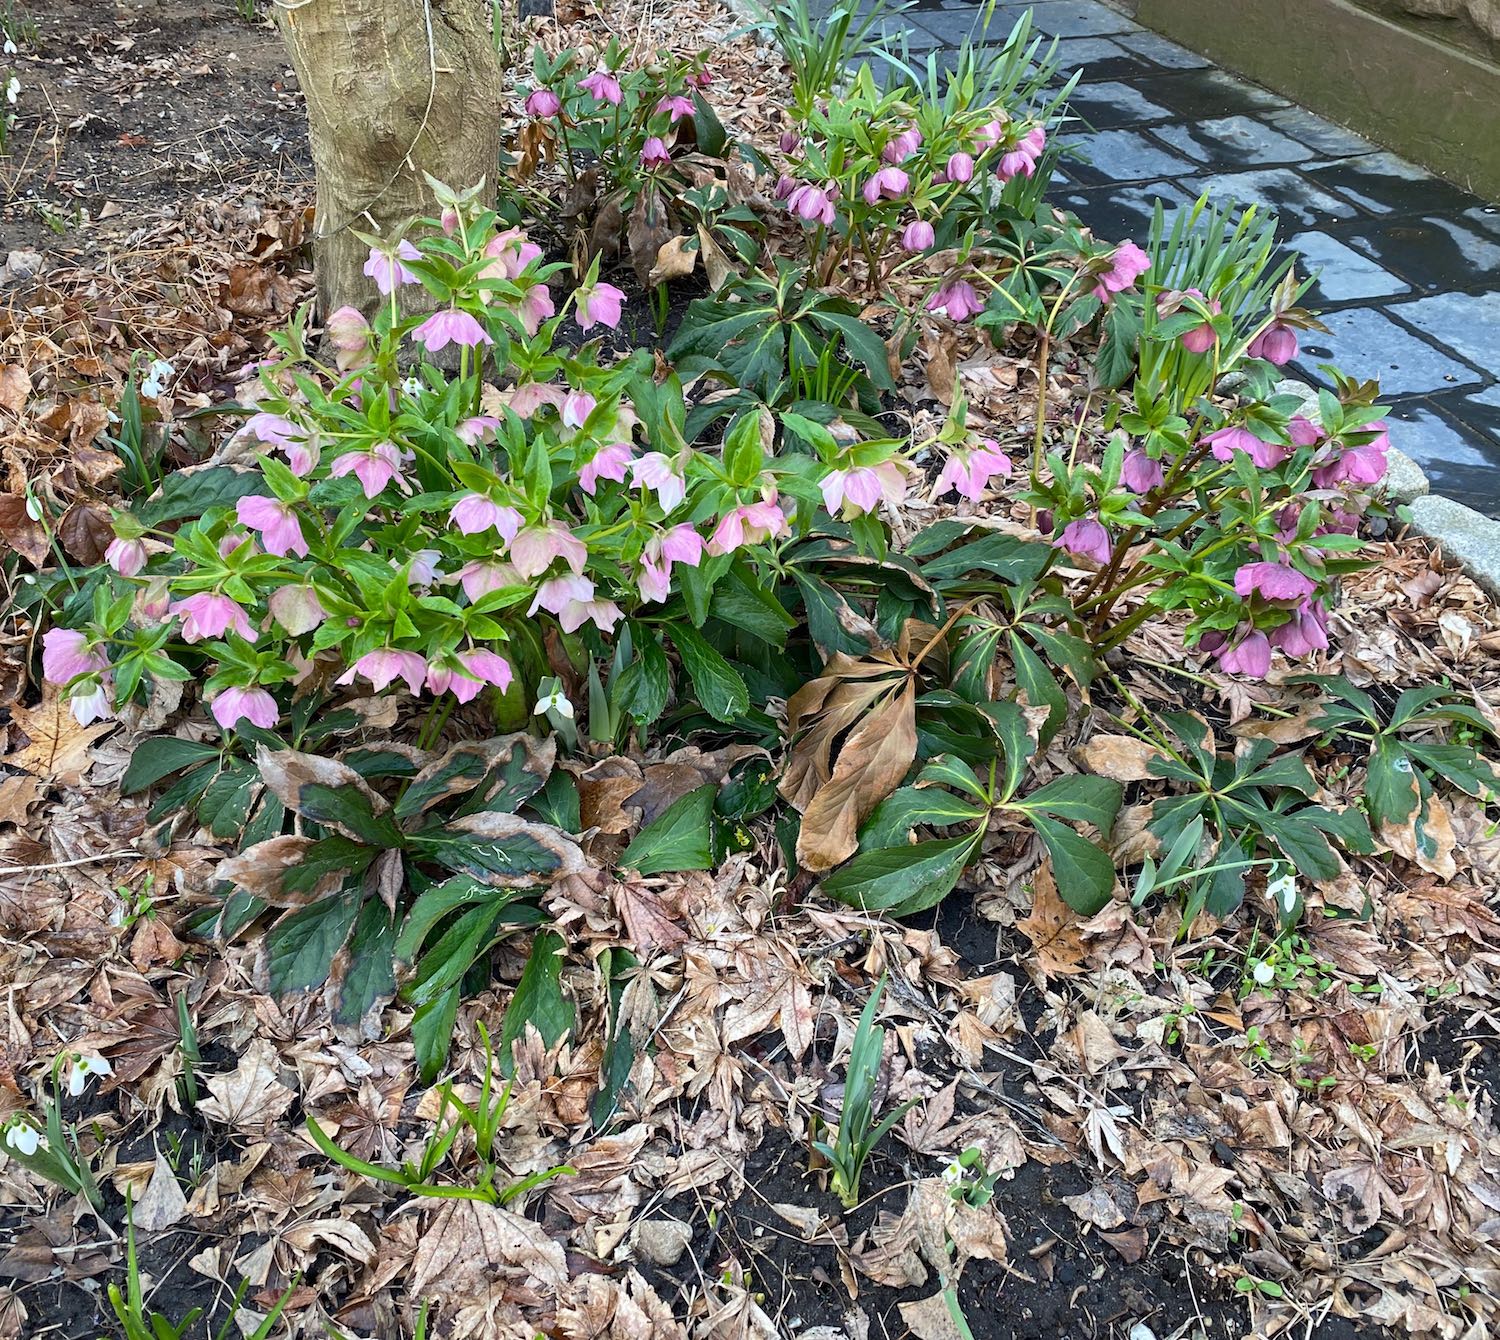 Hellebores and Snowdrops in a Yard on Prospect St. in Brooklyn, NY